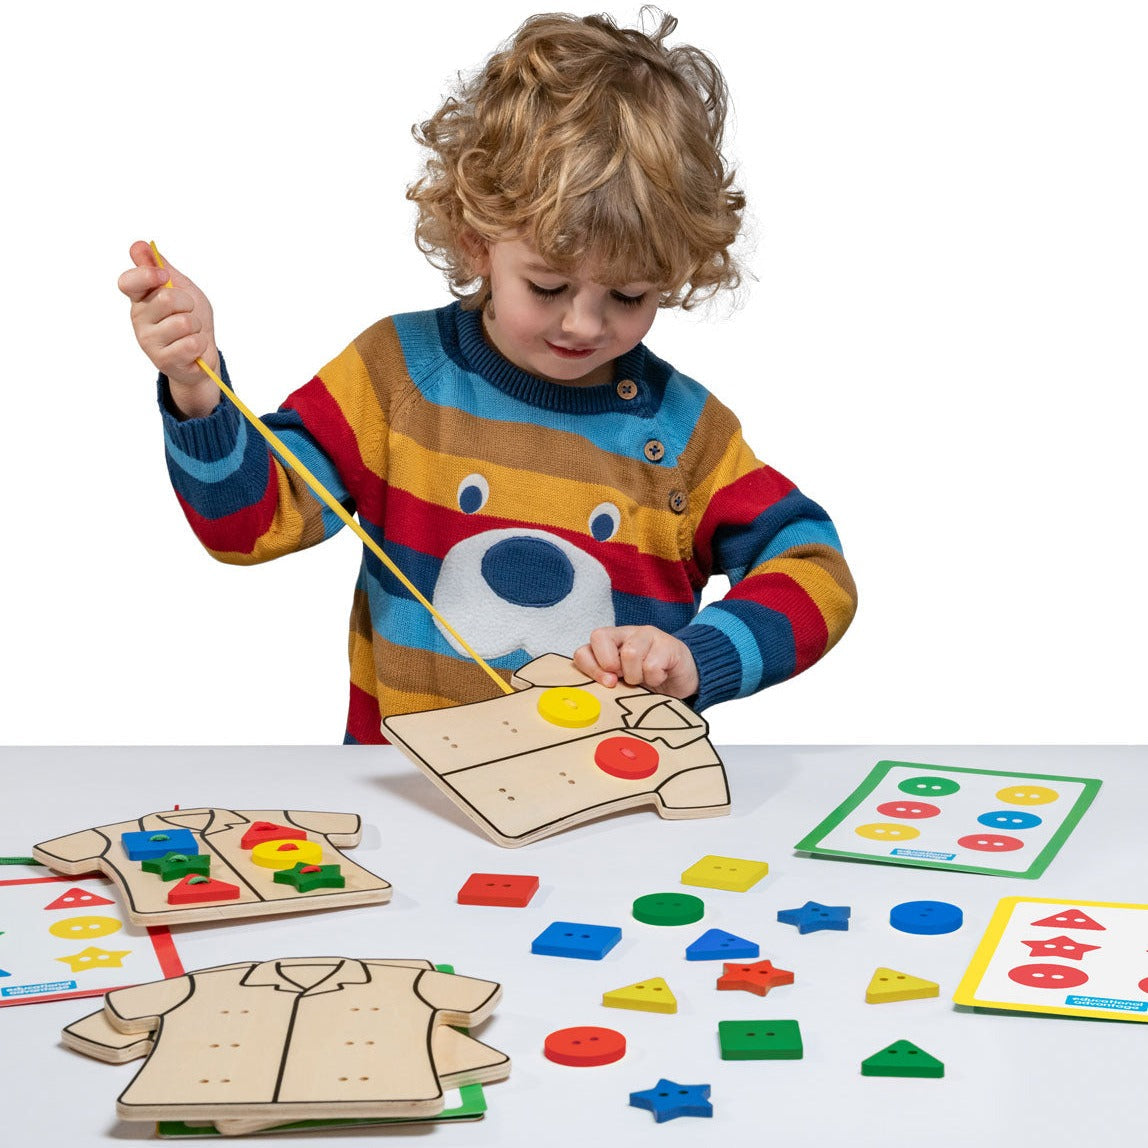 Wooden Lacing Clothes, Introducing the fun and educational Wooden Lacing Clothes set! The Wooden Lacing Clothes set is designed specifically to help young children develop color and shape recognition, this colorful set is packed with interactive features that make learning a joy.Featuring 10 double-sided cards with different challenges across 3 levels, the set is perfect for children of varying skill levels. Whether they're just starting out or looking for a challenge, this set has something for everyone.Ea